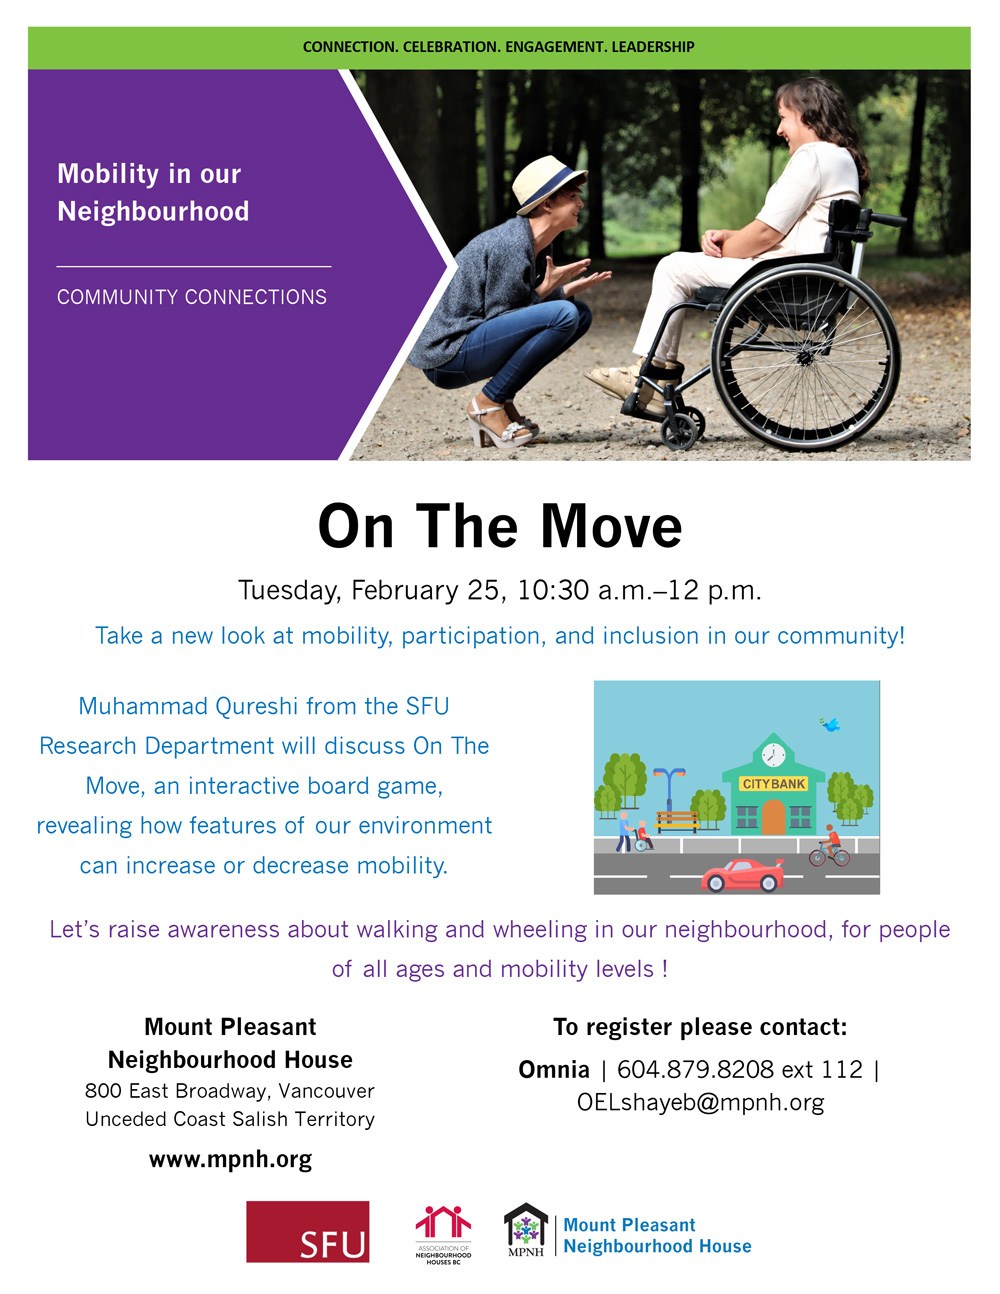 Poster for On The Move, showing a woman using a wheelchair and chatting to a friend